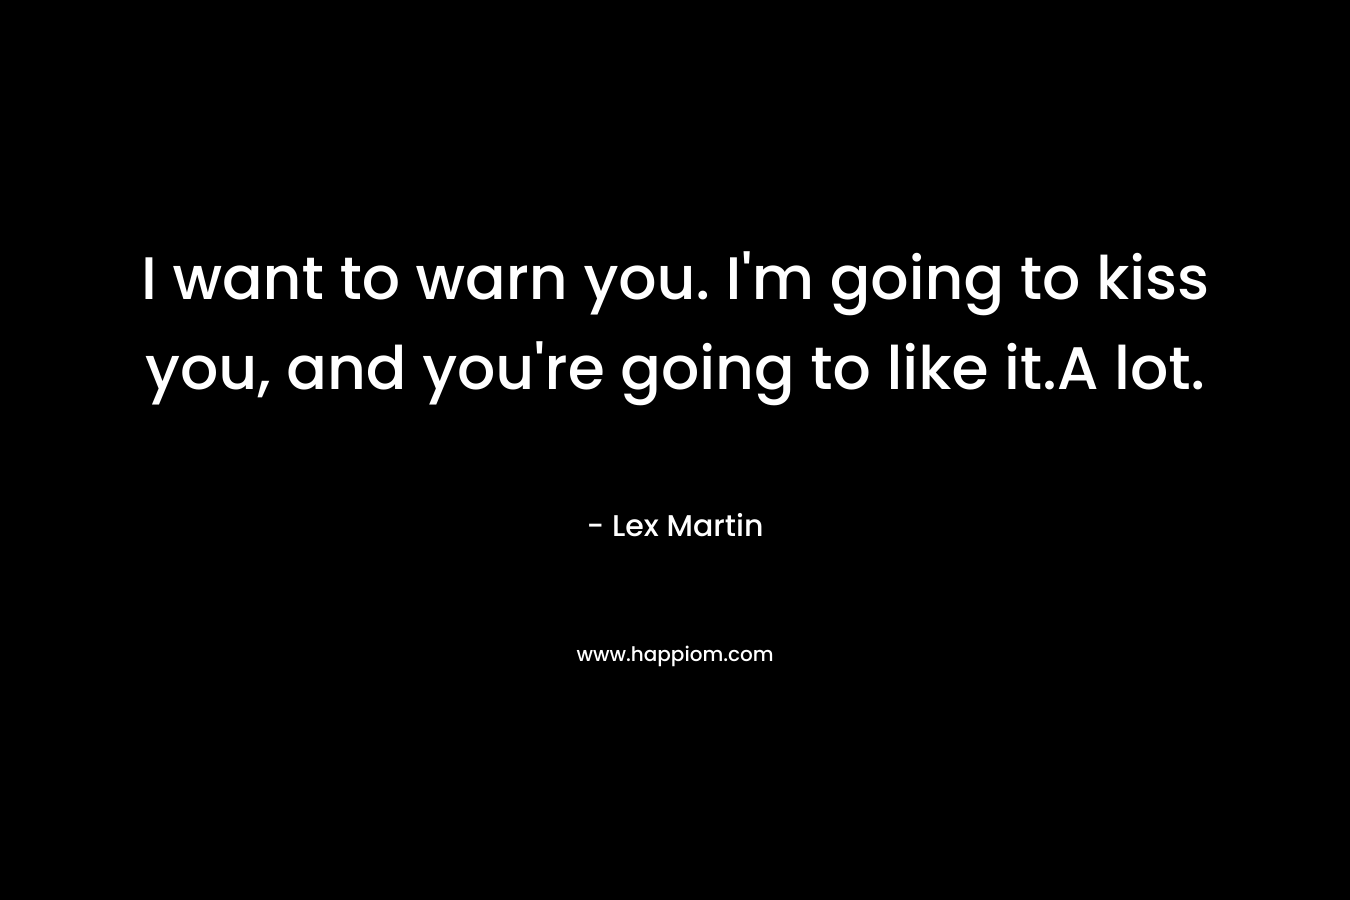 I want to warn you. I’m going to kiss you, and you’re going to like it.A lot. – Lex Martin